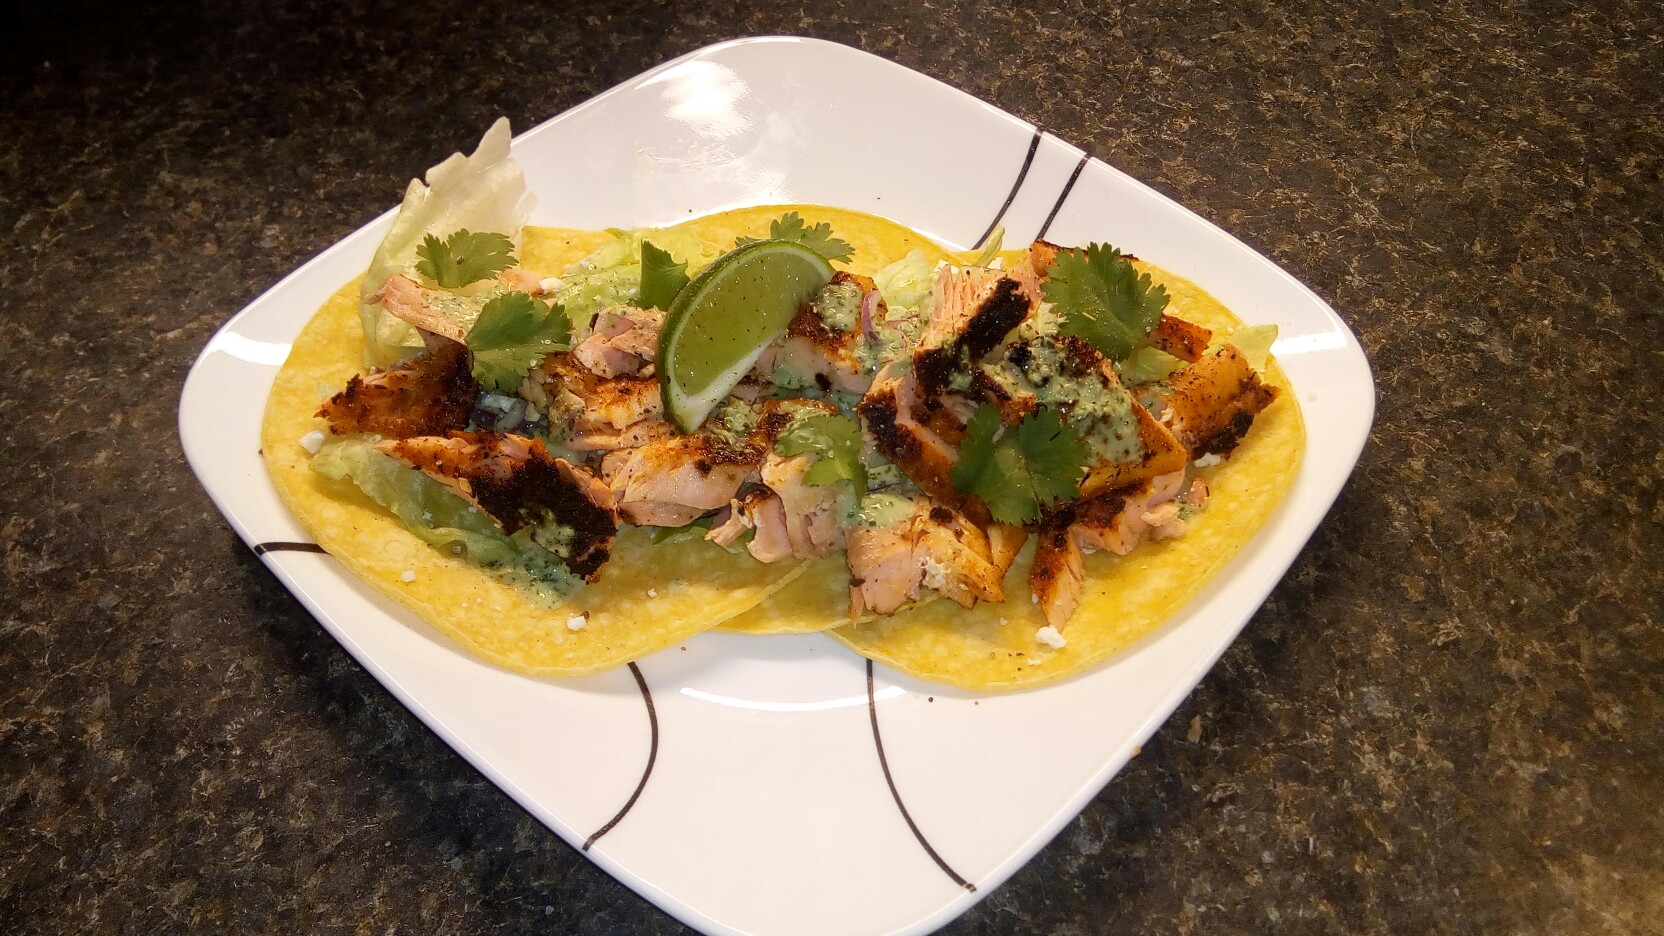 Blackened steel head trout soft tacos, with cilantro, jalapeno and lime sour cream sauce and red onion.jpg